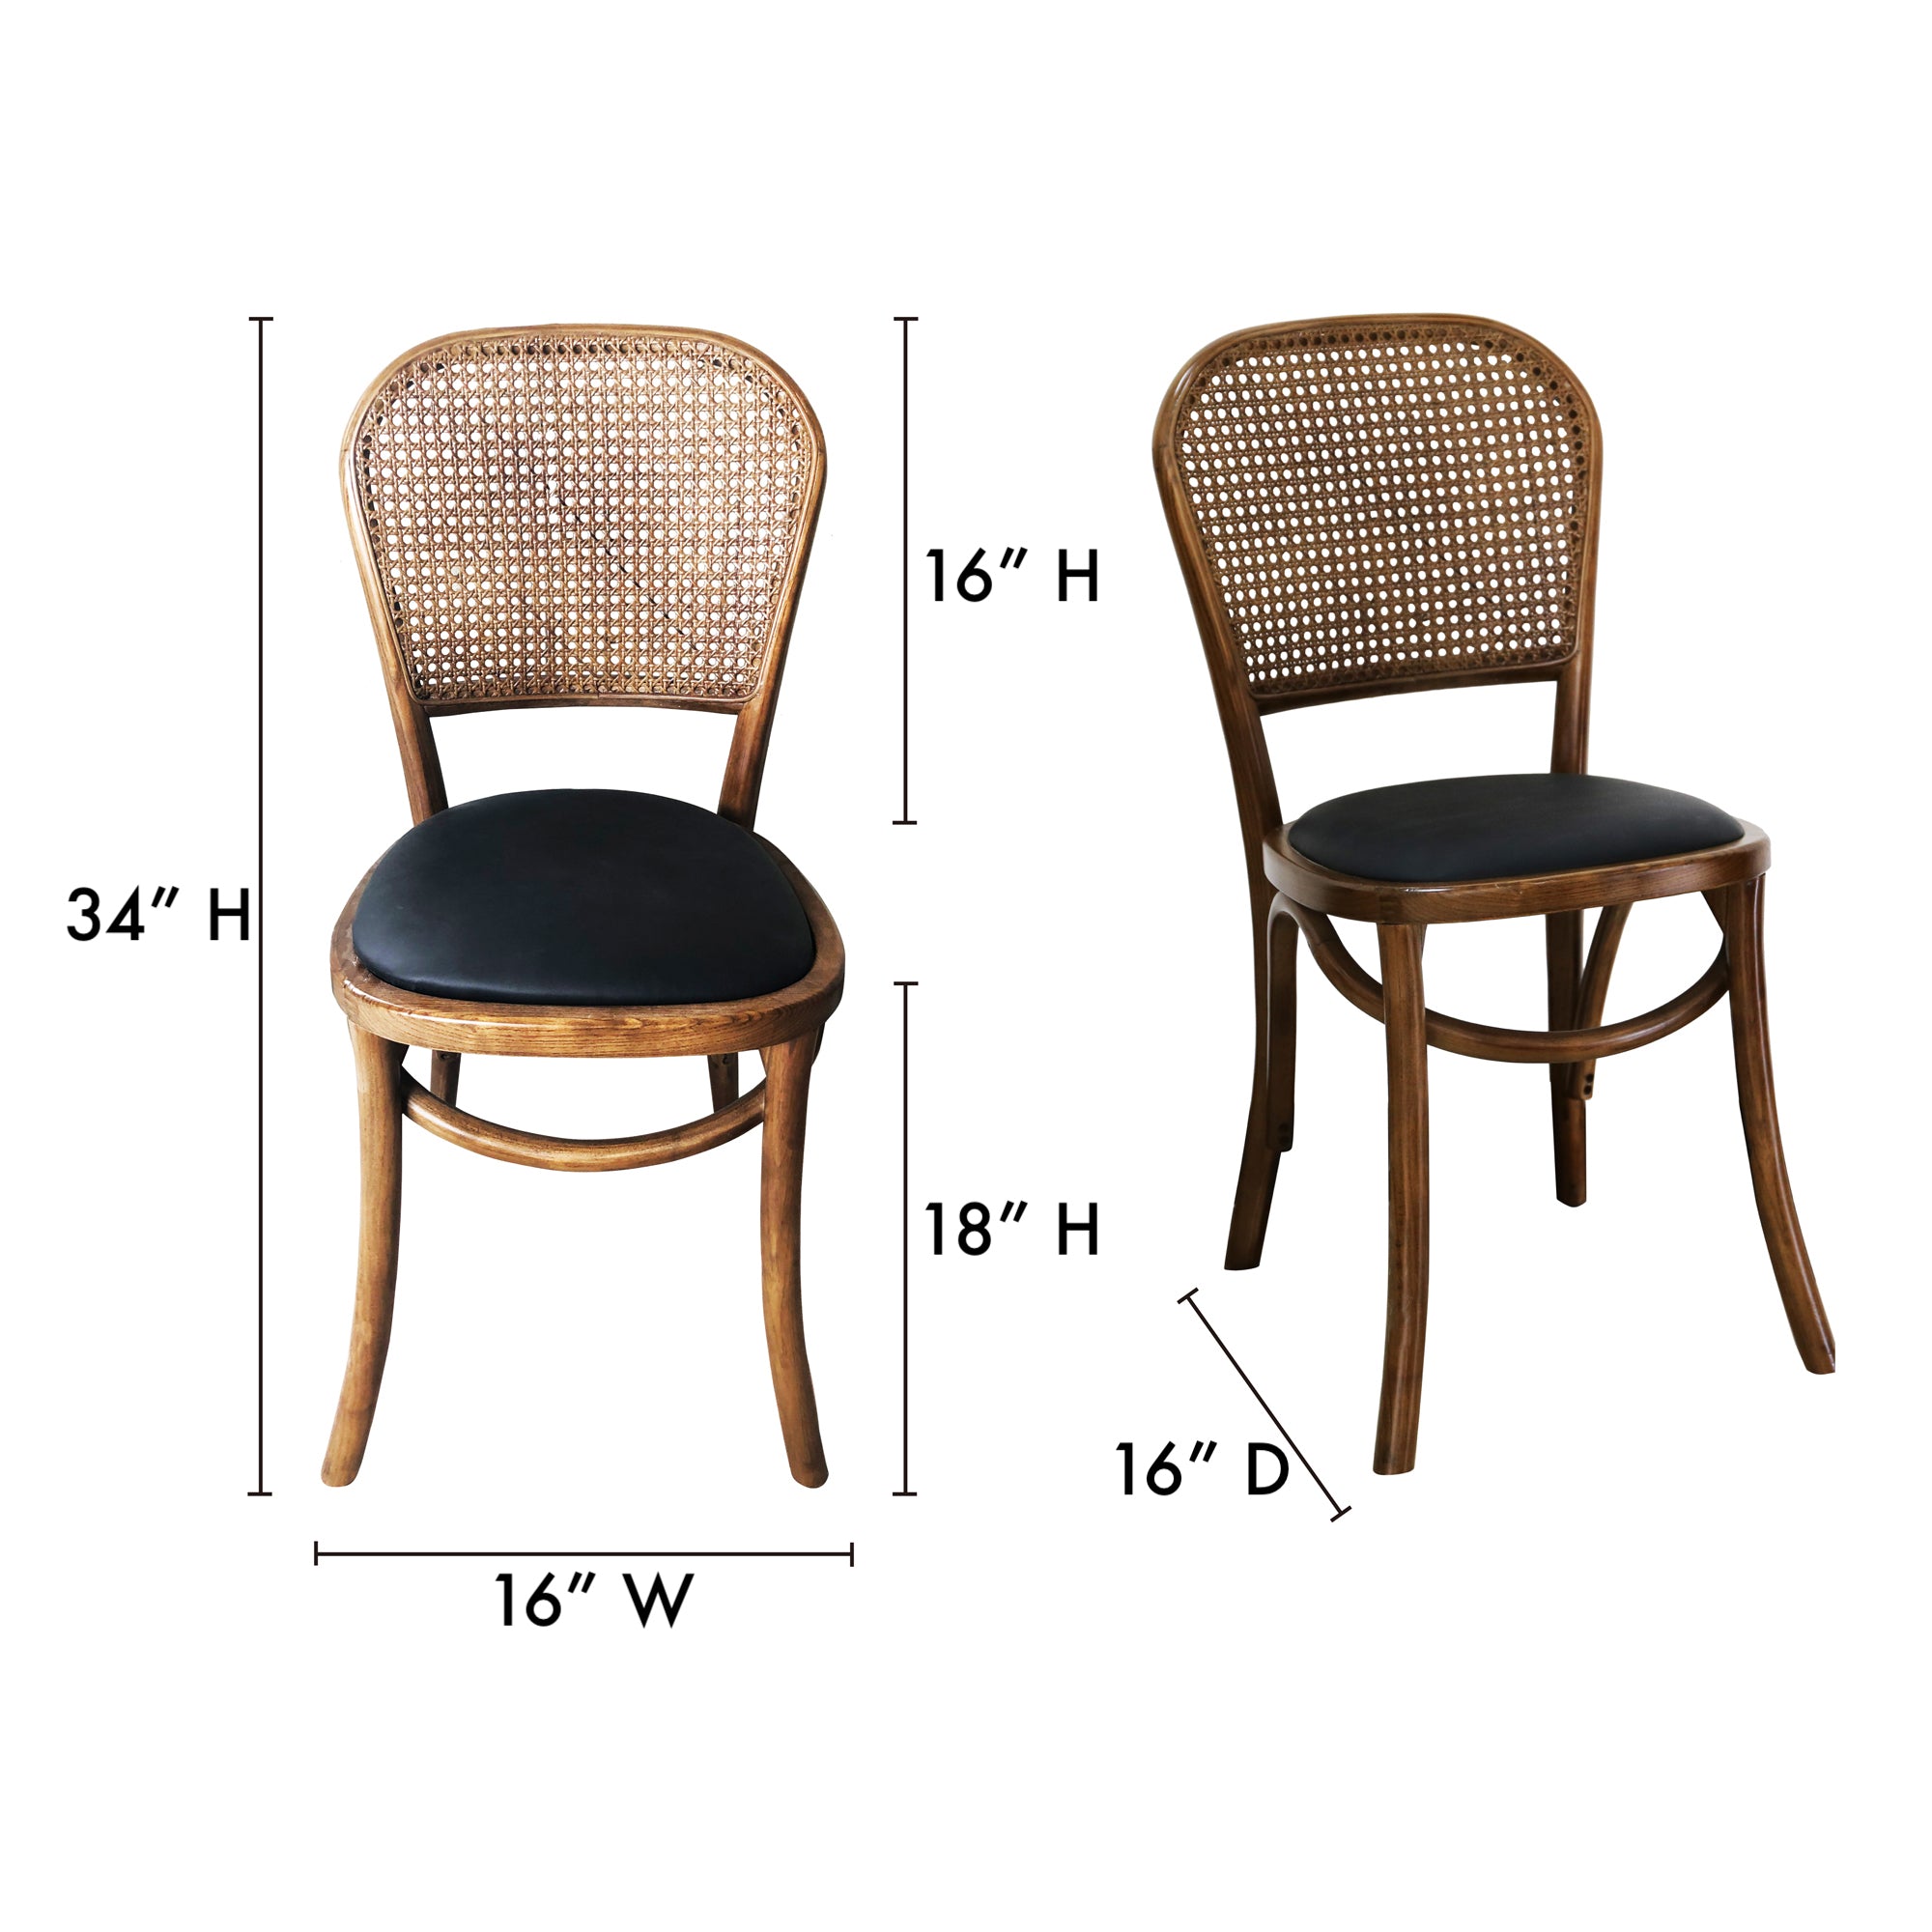 Bedford Dining Chair Light Brown - Set Of Two